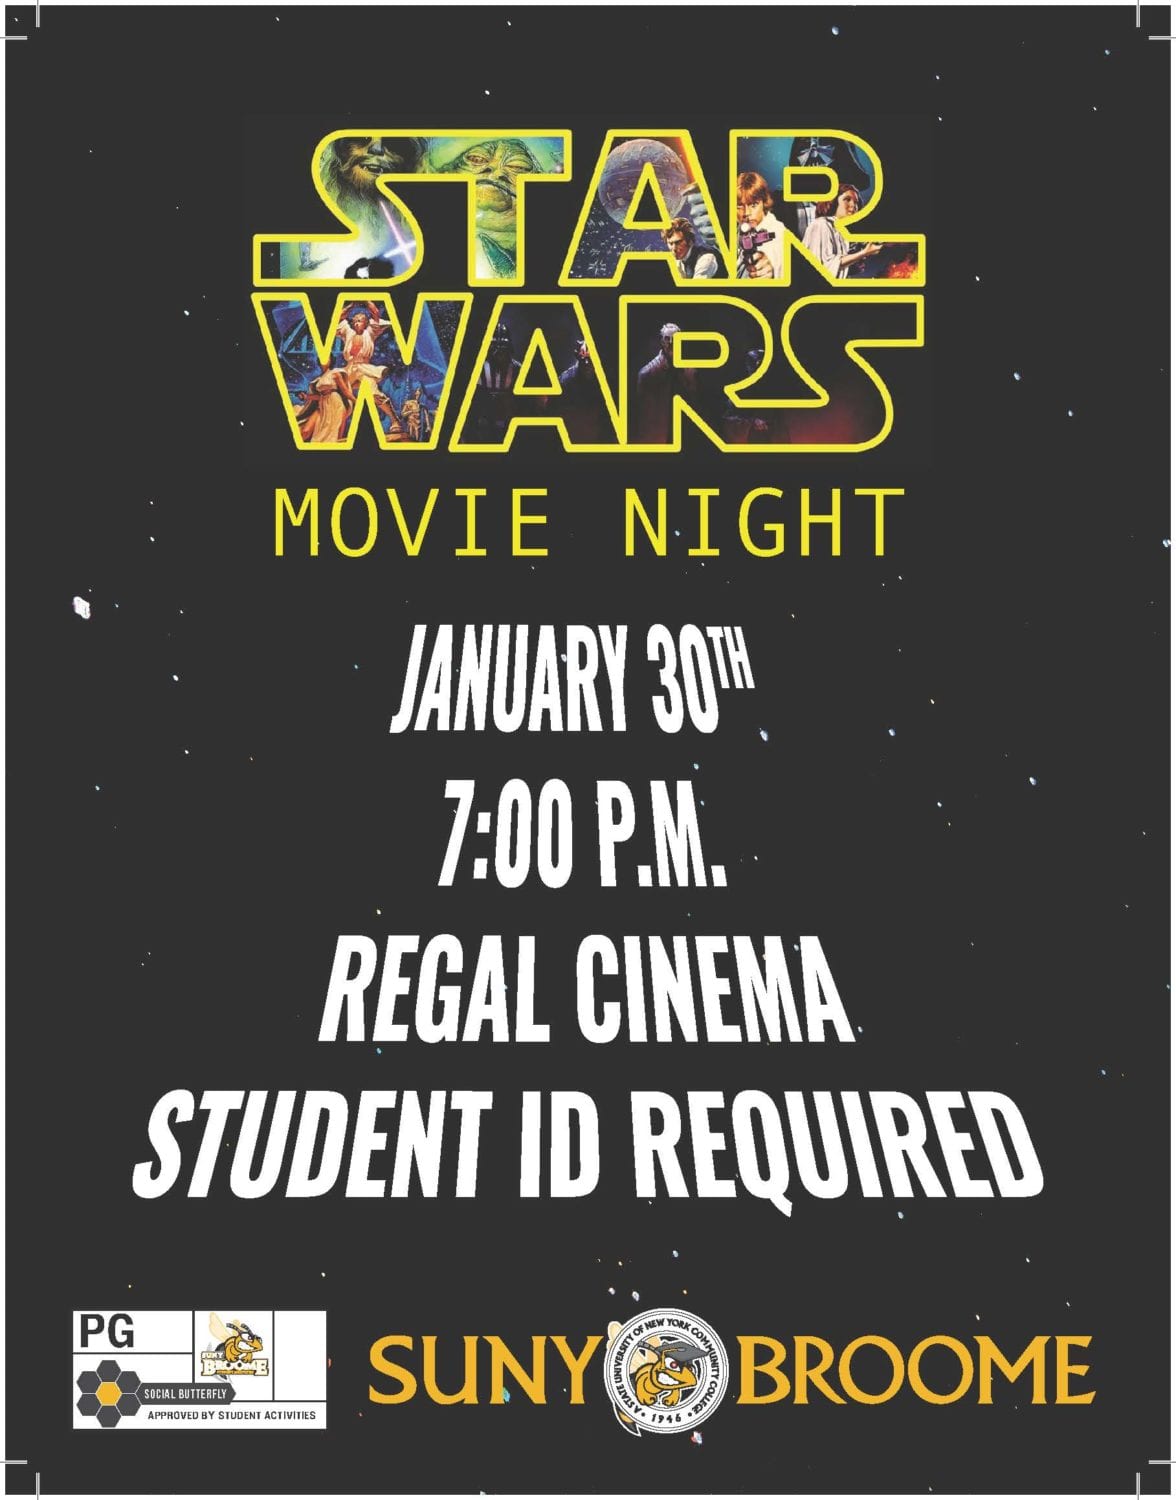 TONIGHT: See Star Wars for free with your student ID!